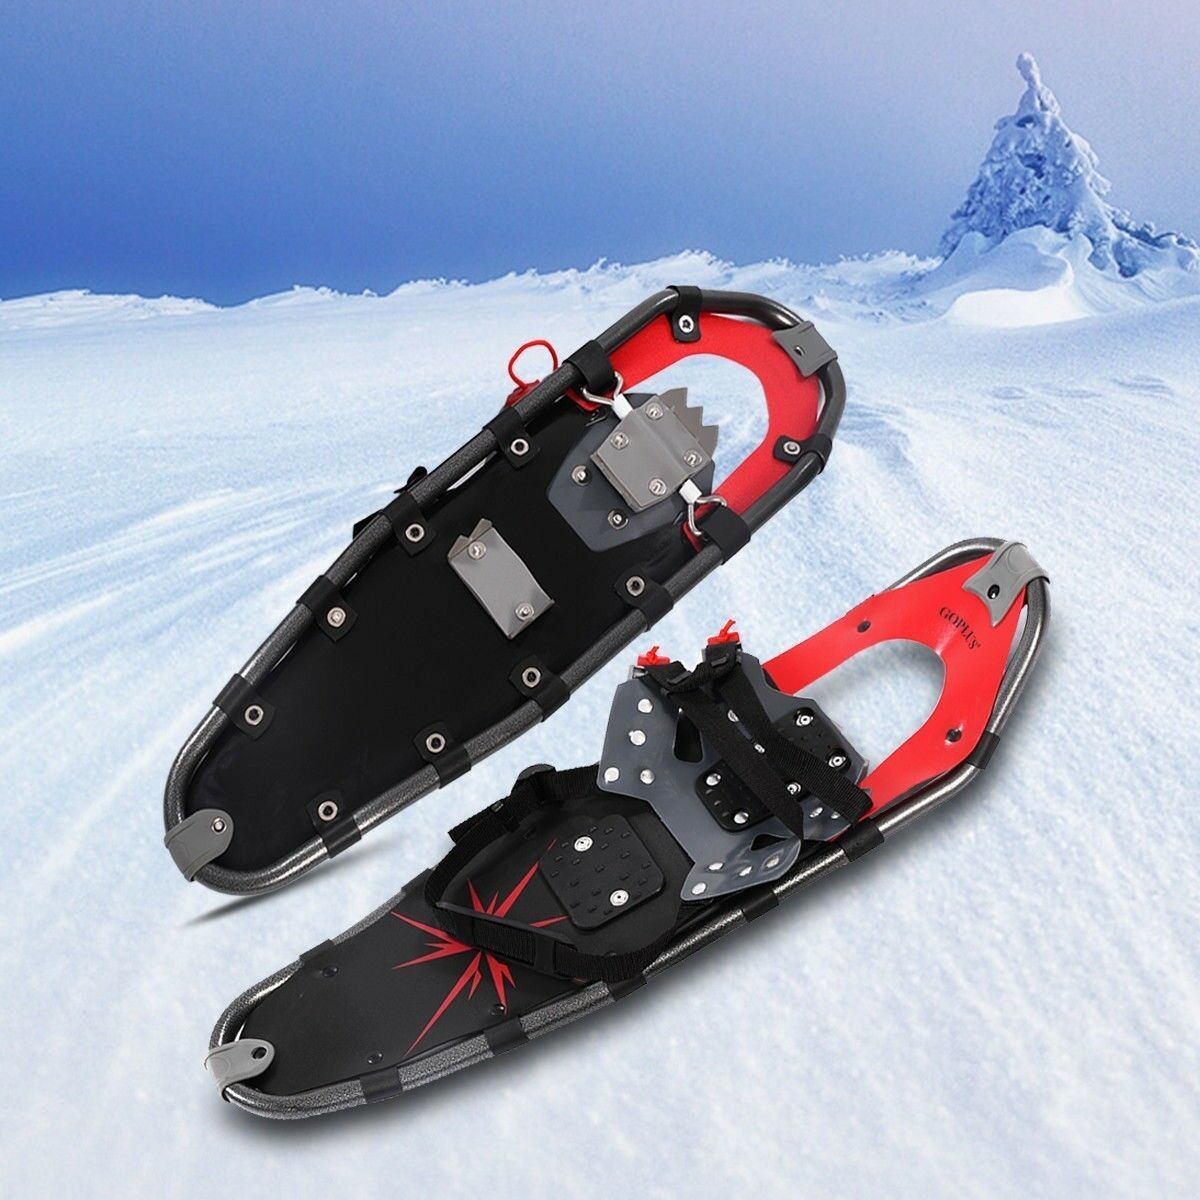 Snowshoeing Equipment Snowshoes Shoes For Snow Walking Poles Carry Bag ...